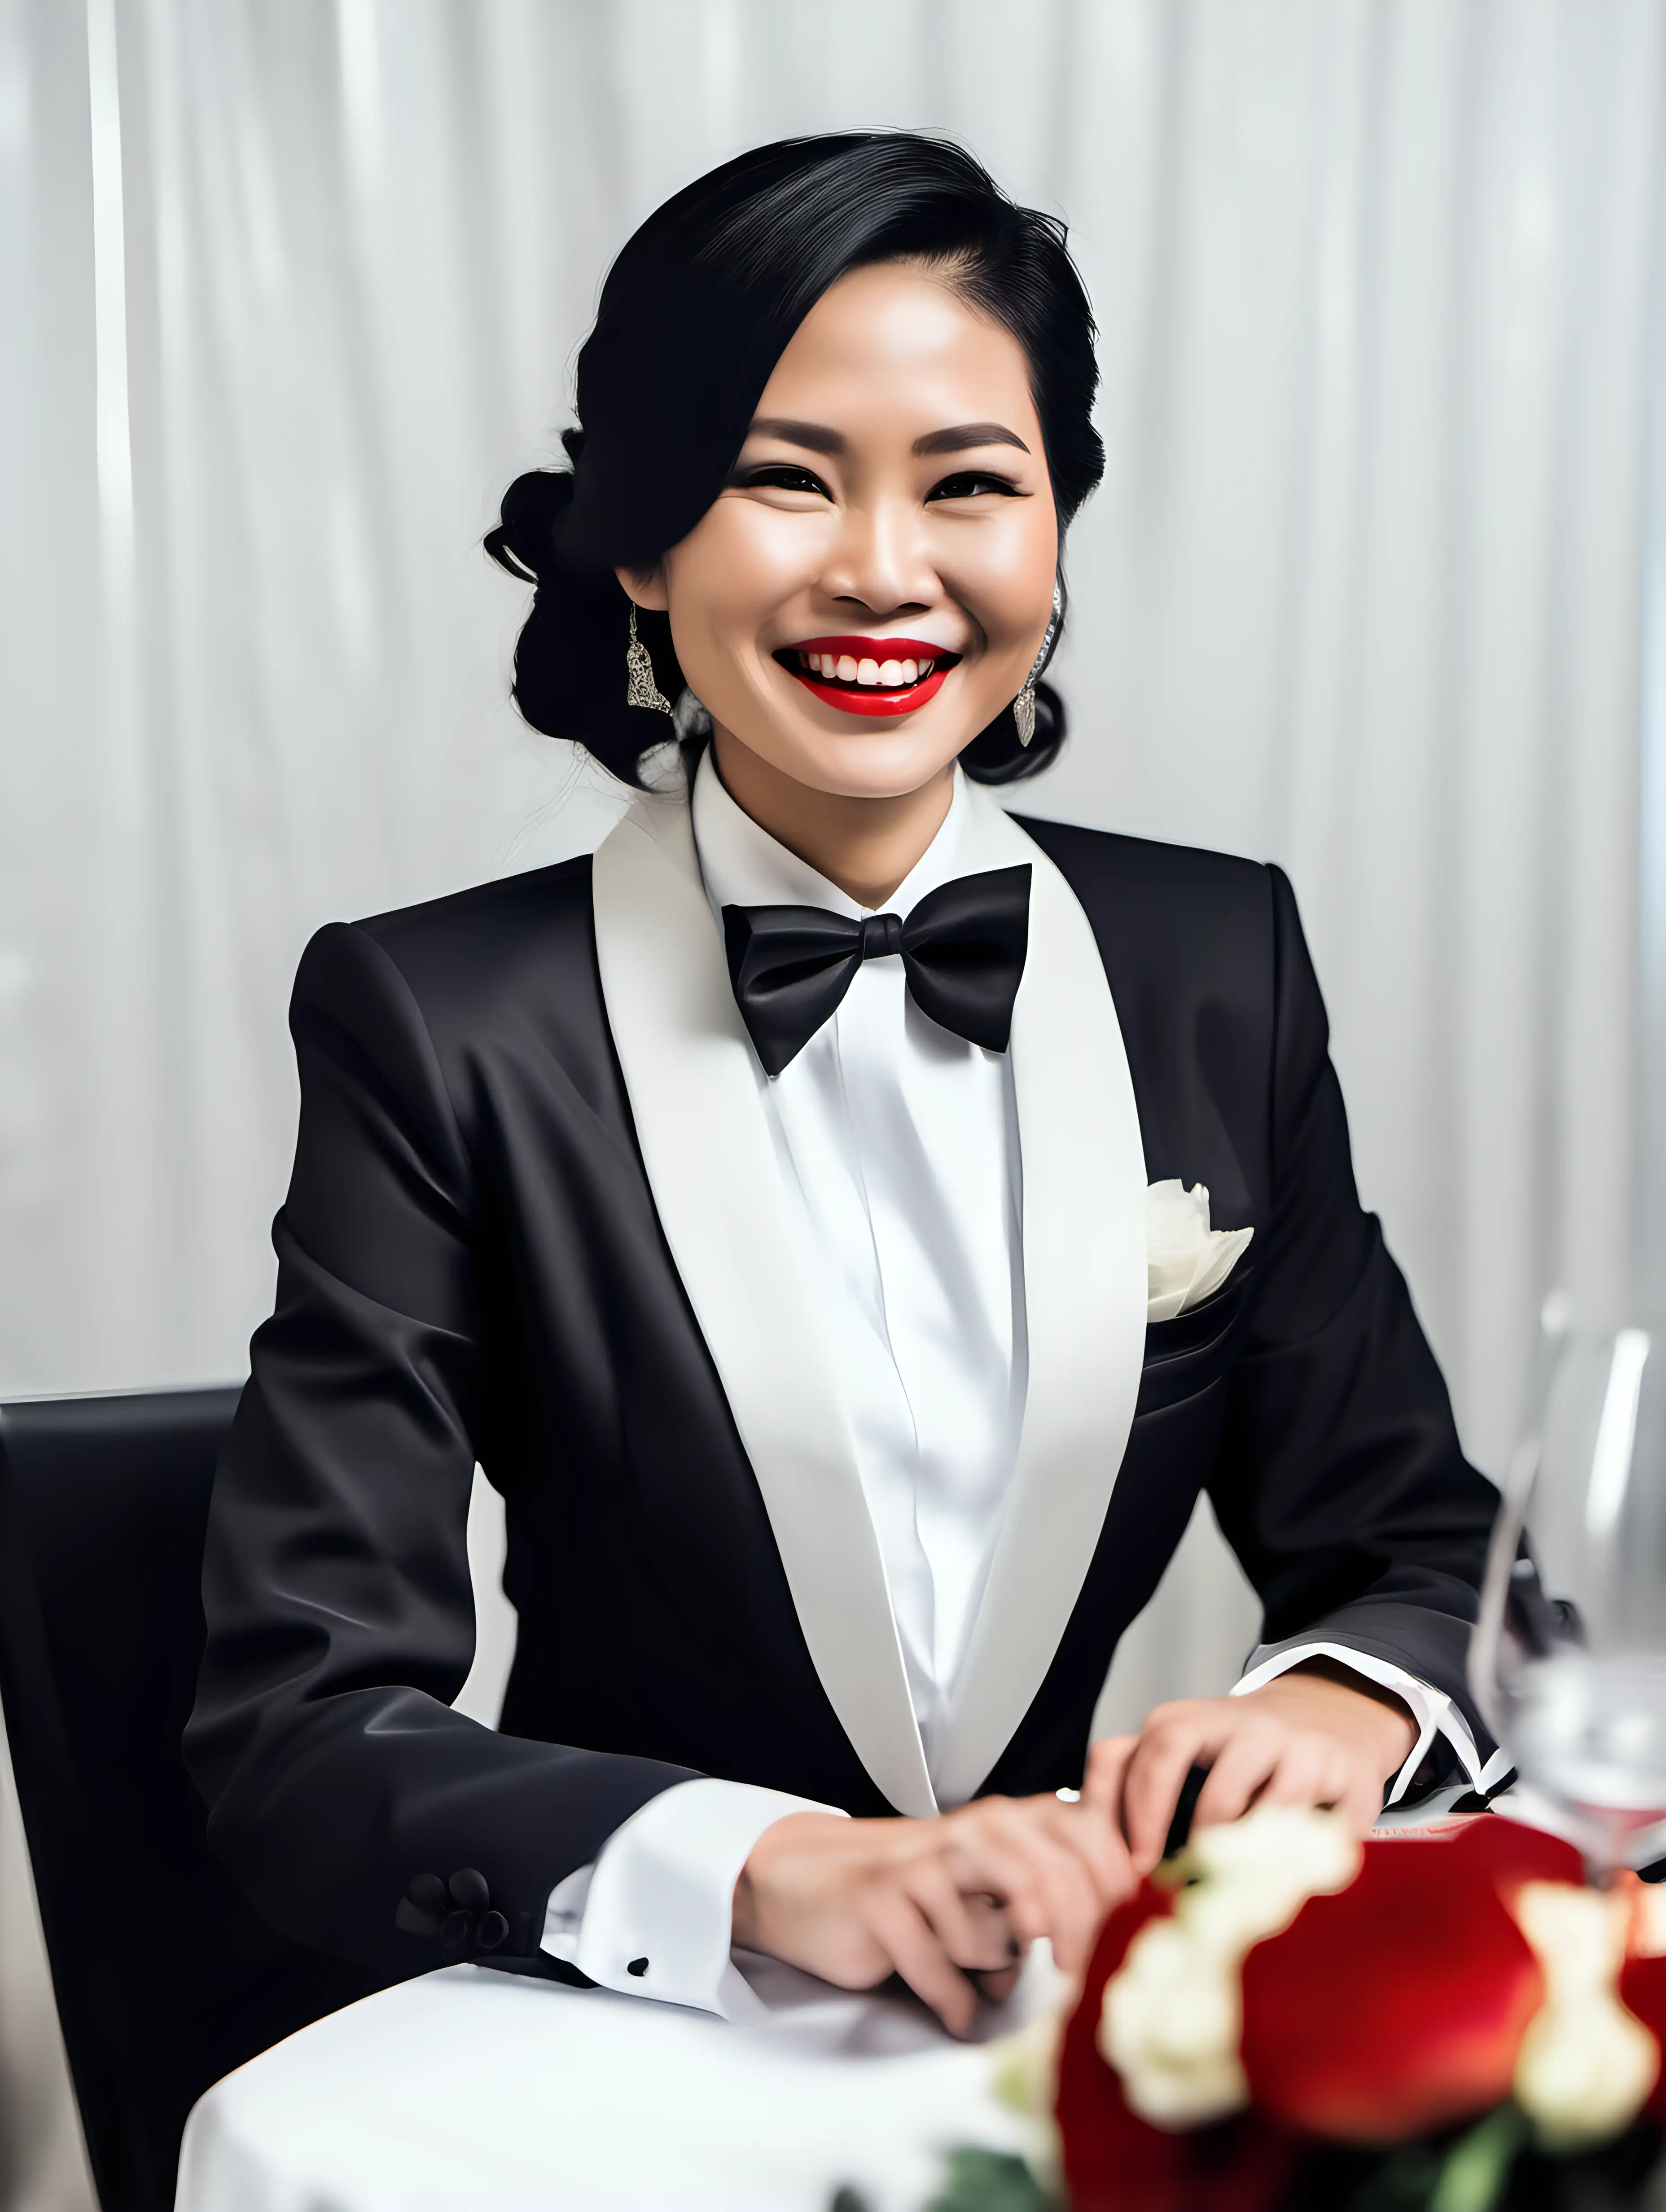 35 year old gorgeous and smiling and laughing Vietnamese woman with black shoulder length hair and red lipstick wearing a formal tuxedo with a black bow tie and big black cufflinks. Her jacket has a corsage. She is sitting at a dinner table.